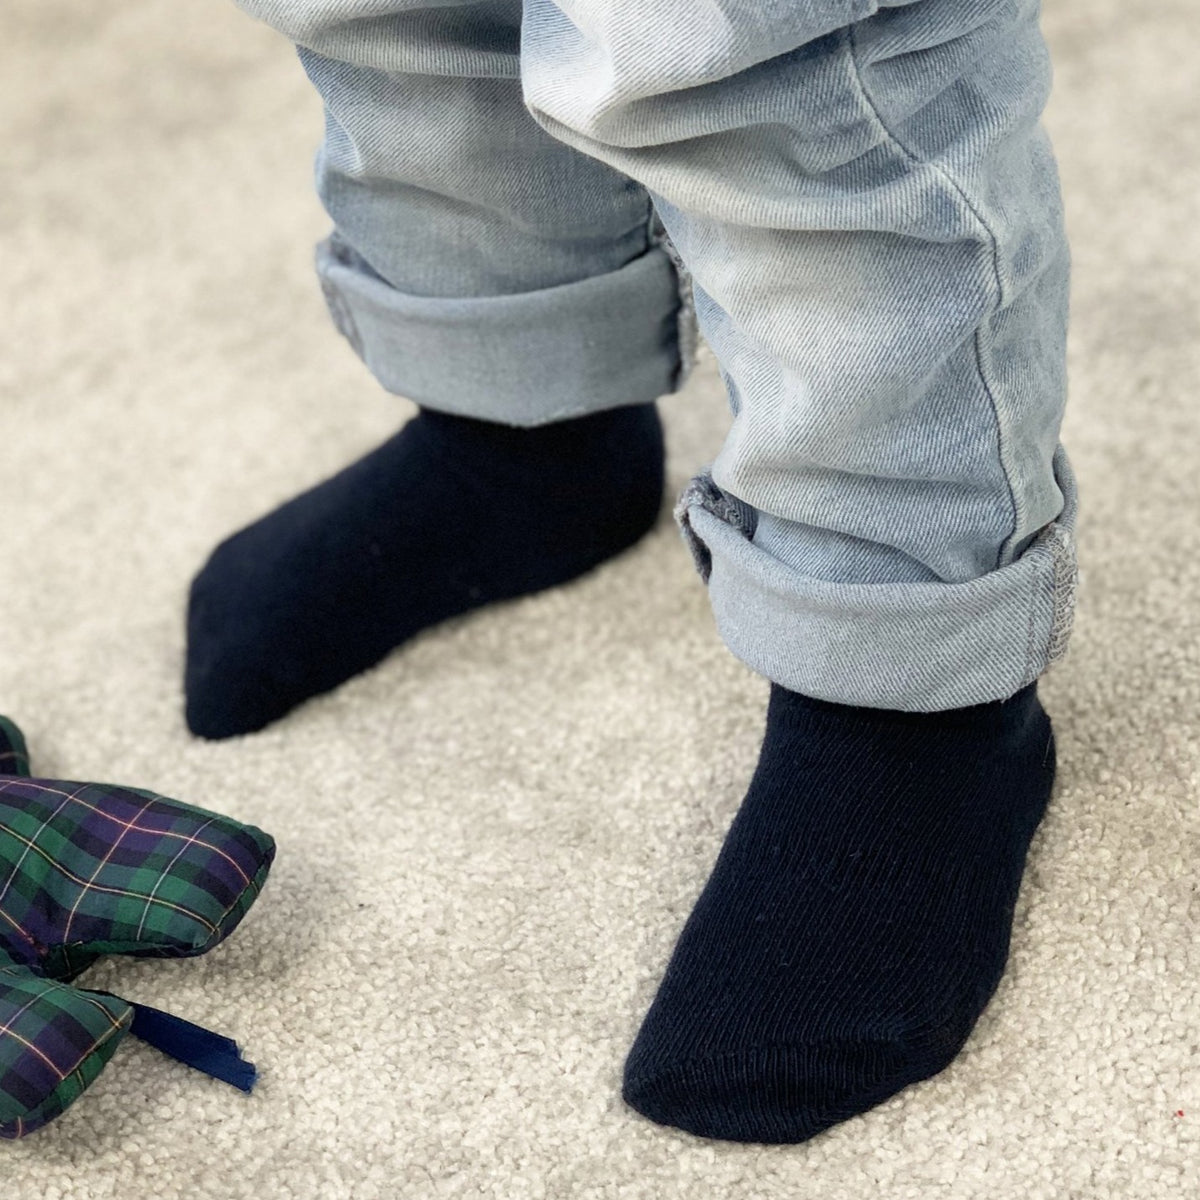 Non-Slip Stay on Baby and Toddler Socks - 5 Pack in Navy Stripe and Navy